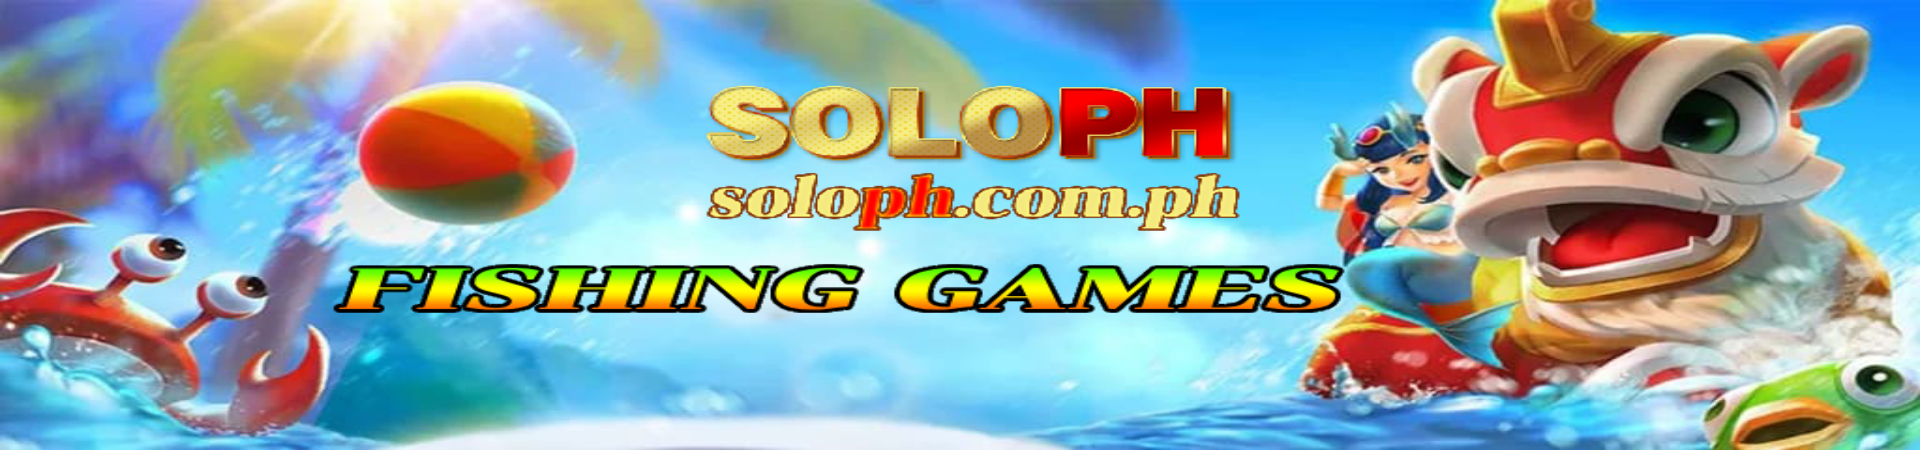 fishing games soloph banner